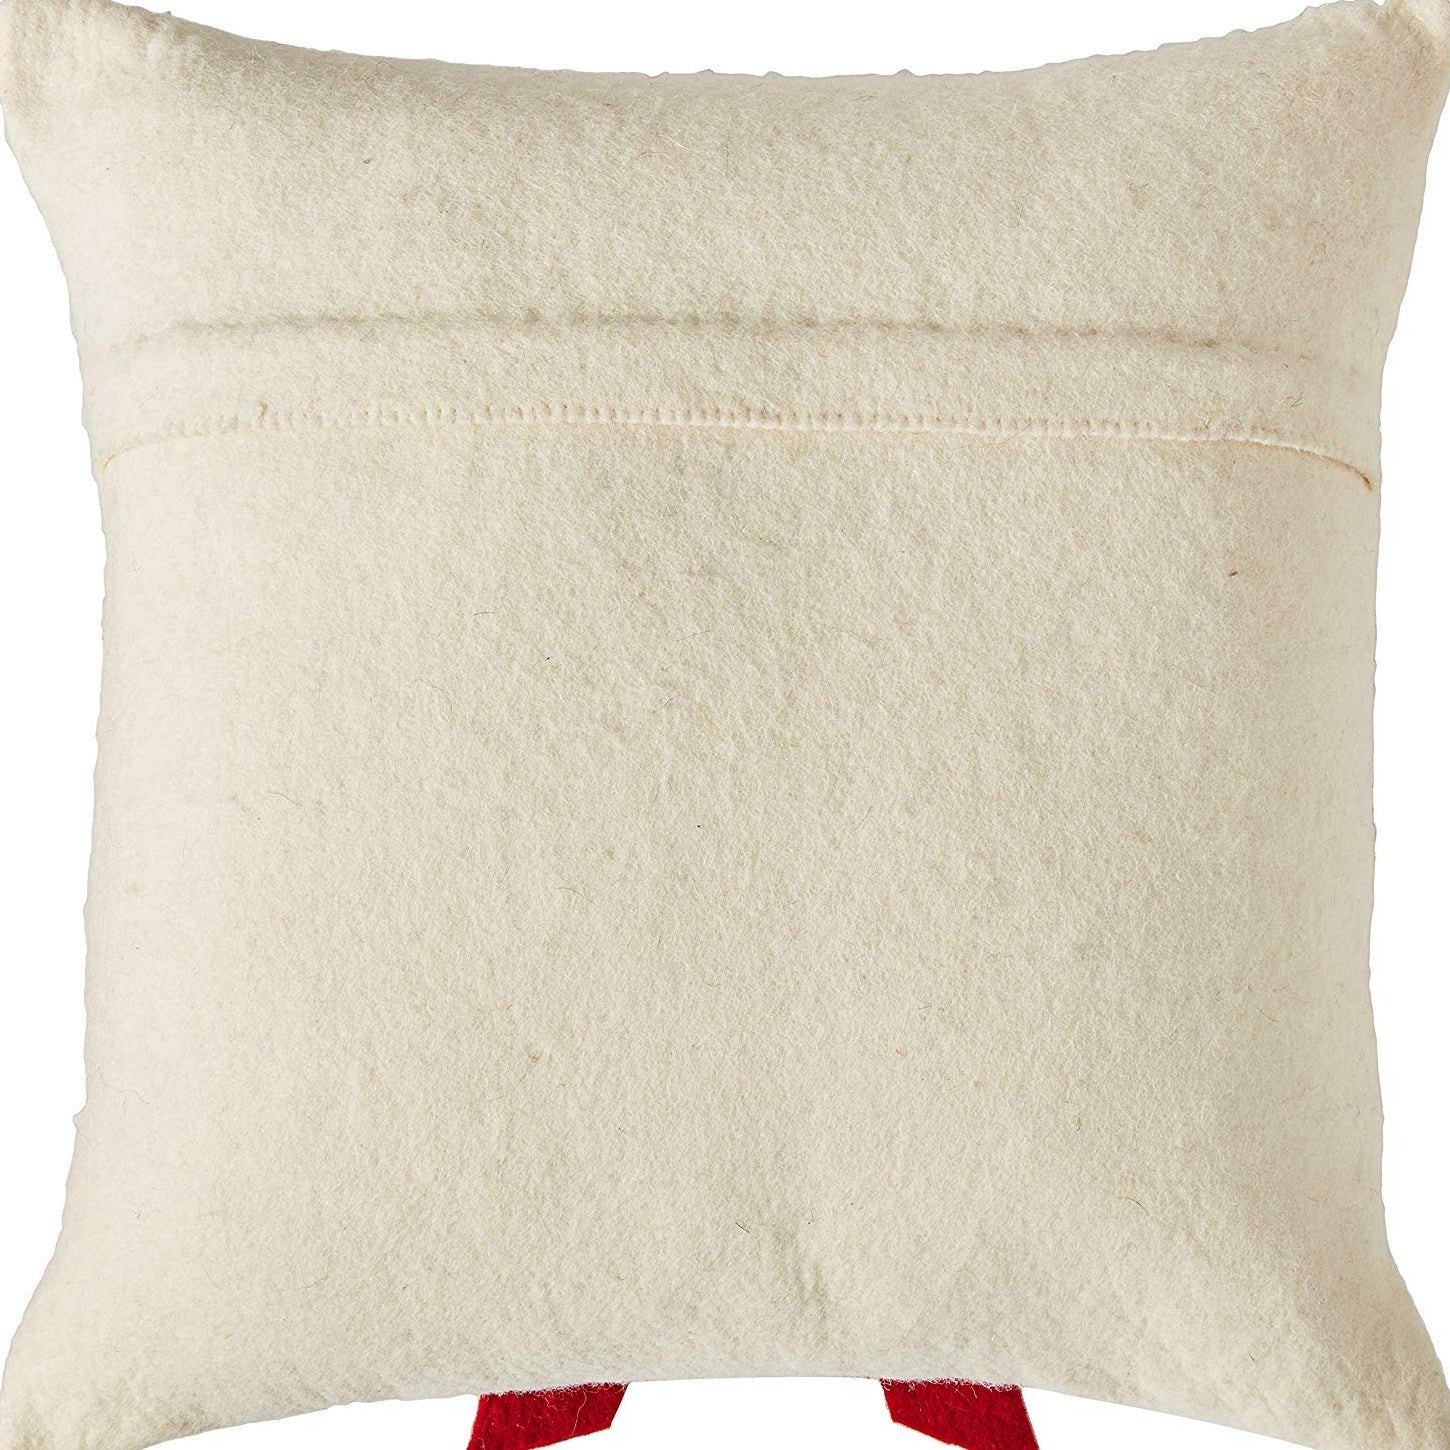 Handmade Christmas Pillow Cover in Hand Felted Wool - Red Reindeer